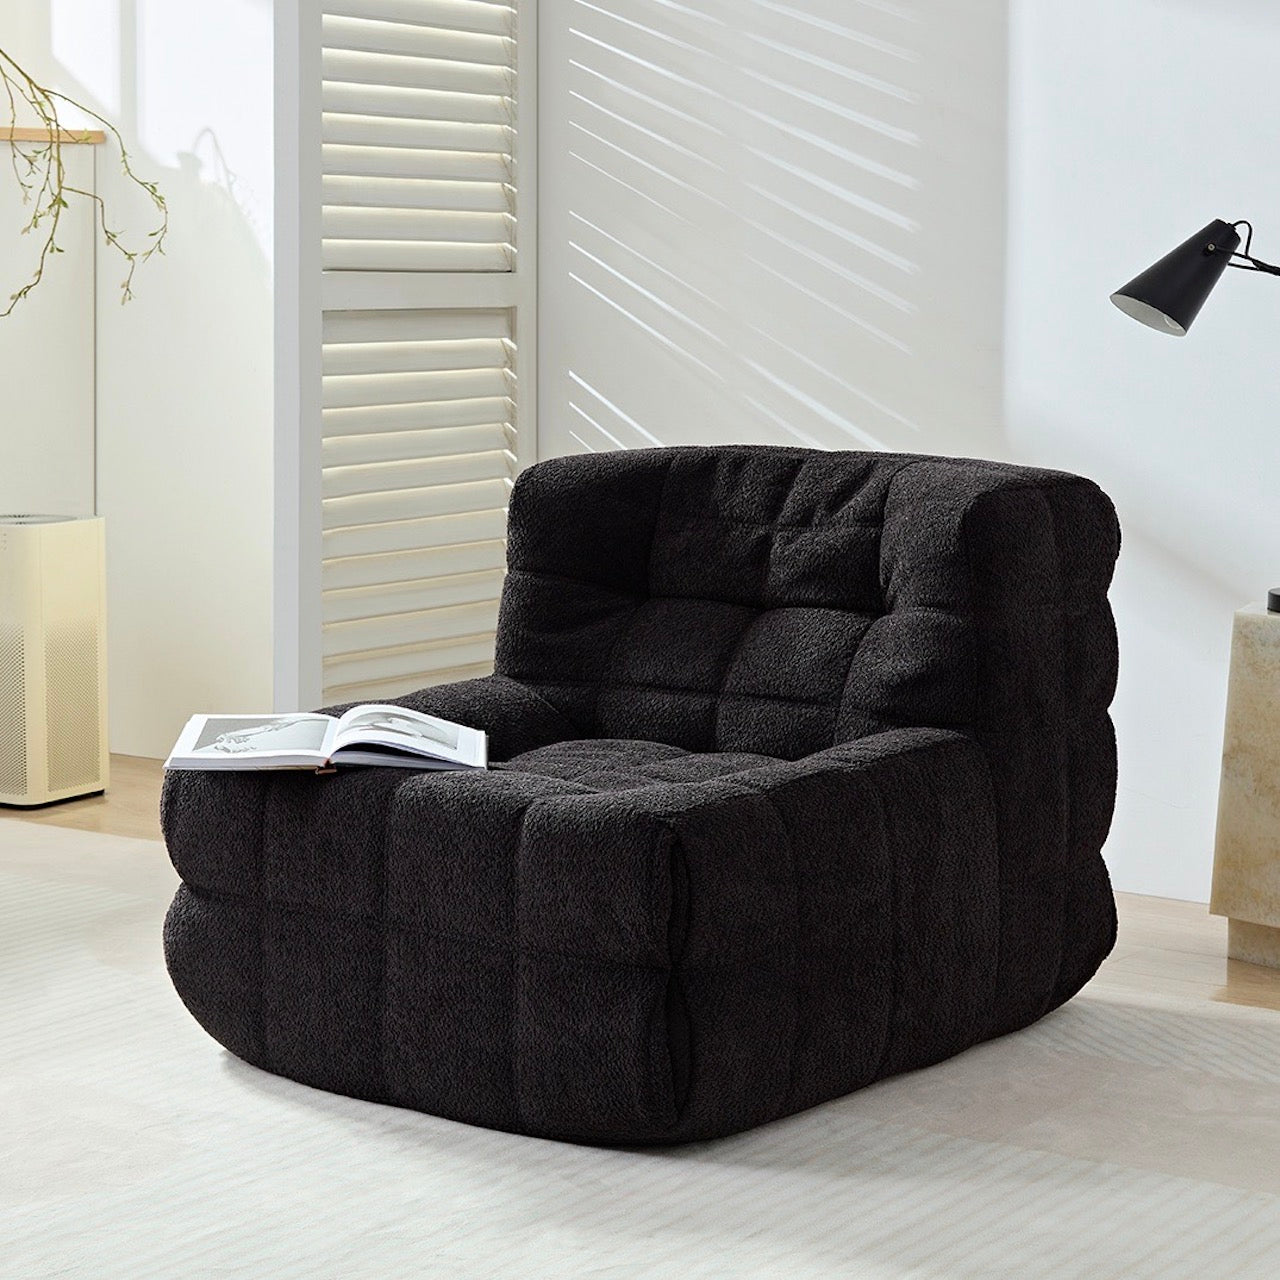 Black corduroy vintage caterpillar lounge chair in a cozy living room setting